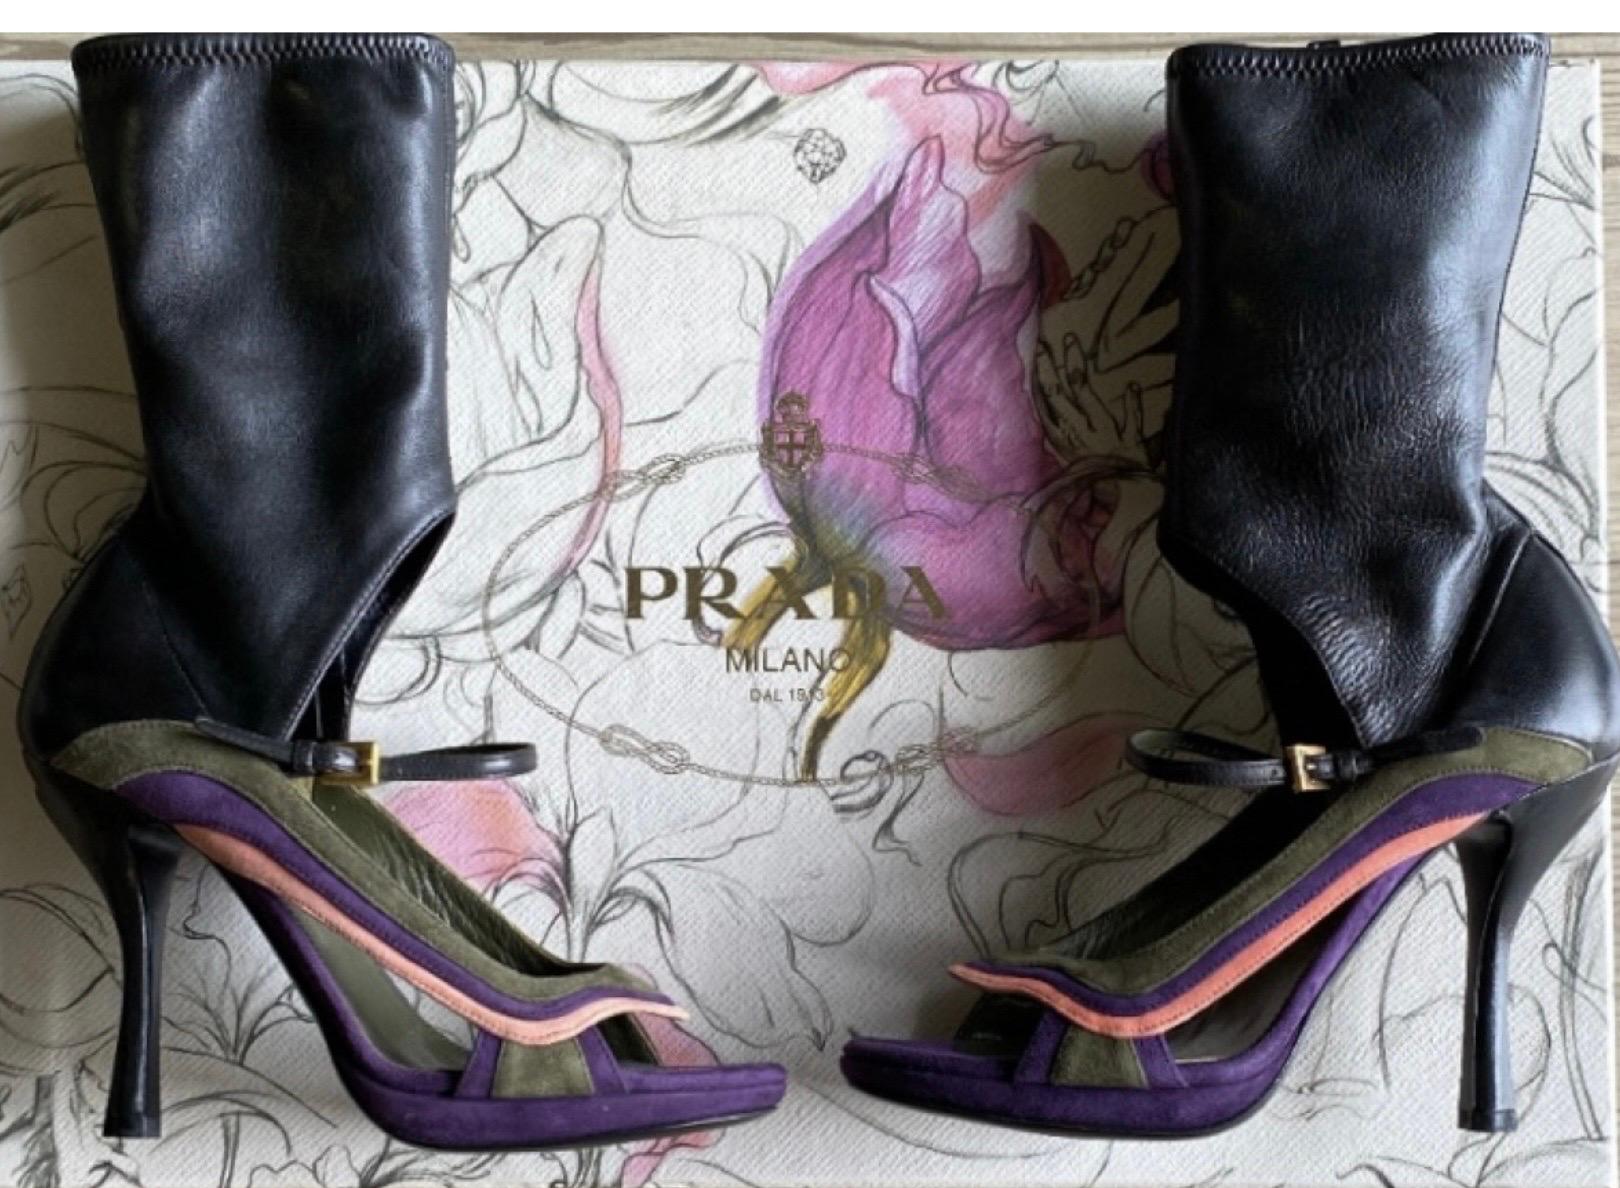 Prada SS 2008 Waves color ankle boot For Sale 3